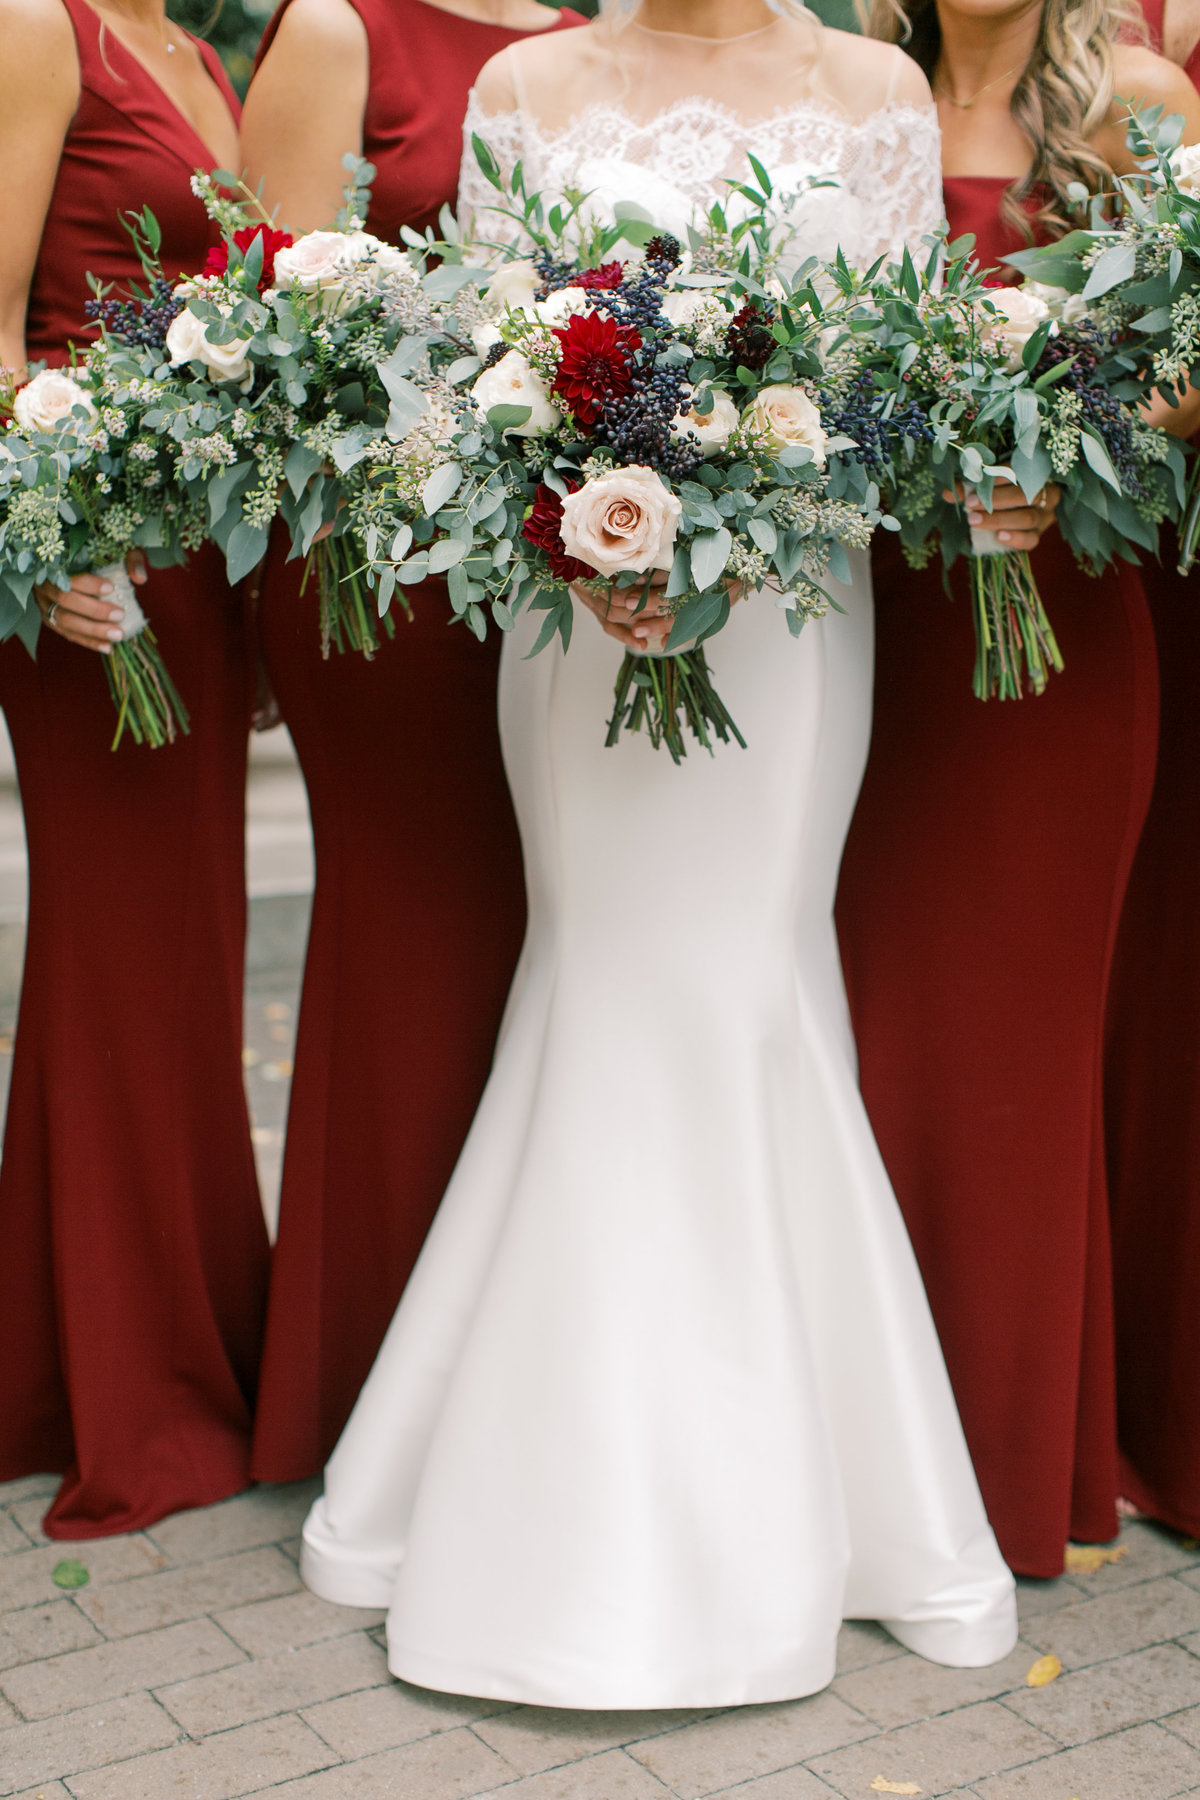 bride wearing strapless wedding gown standing with bridesmaids wearing red dresses holding bouquets